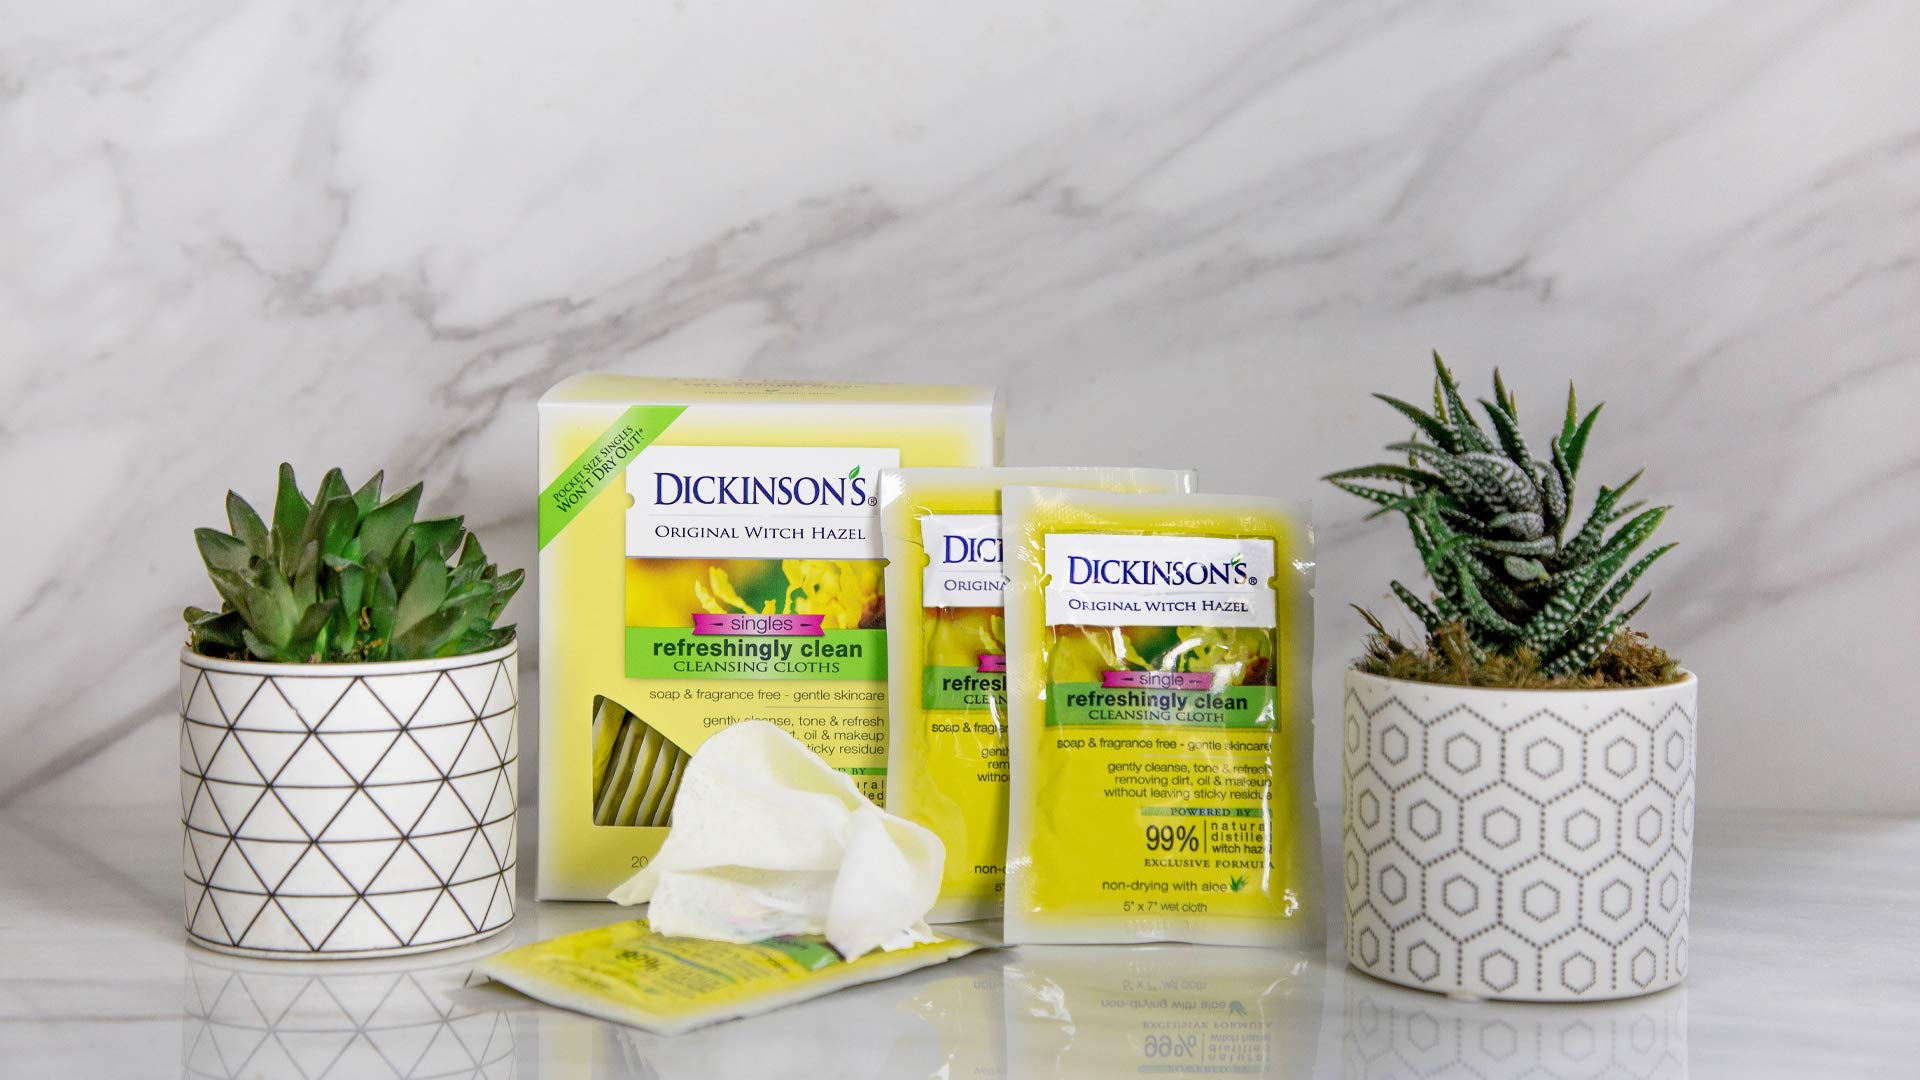 Dickinson's Original Refreshingly Clean Facial Wipes Towelettes, Witch Hazel and Aloe, 20 Ct - image 5 of 7